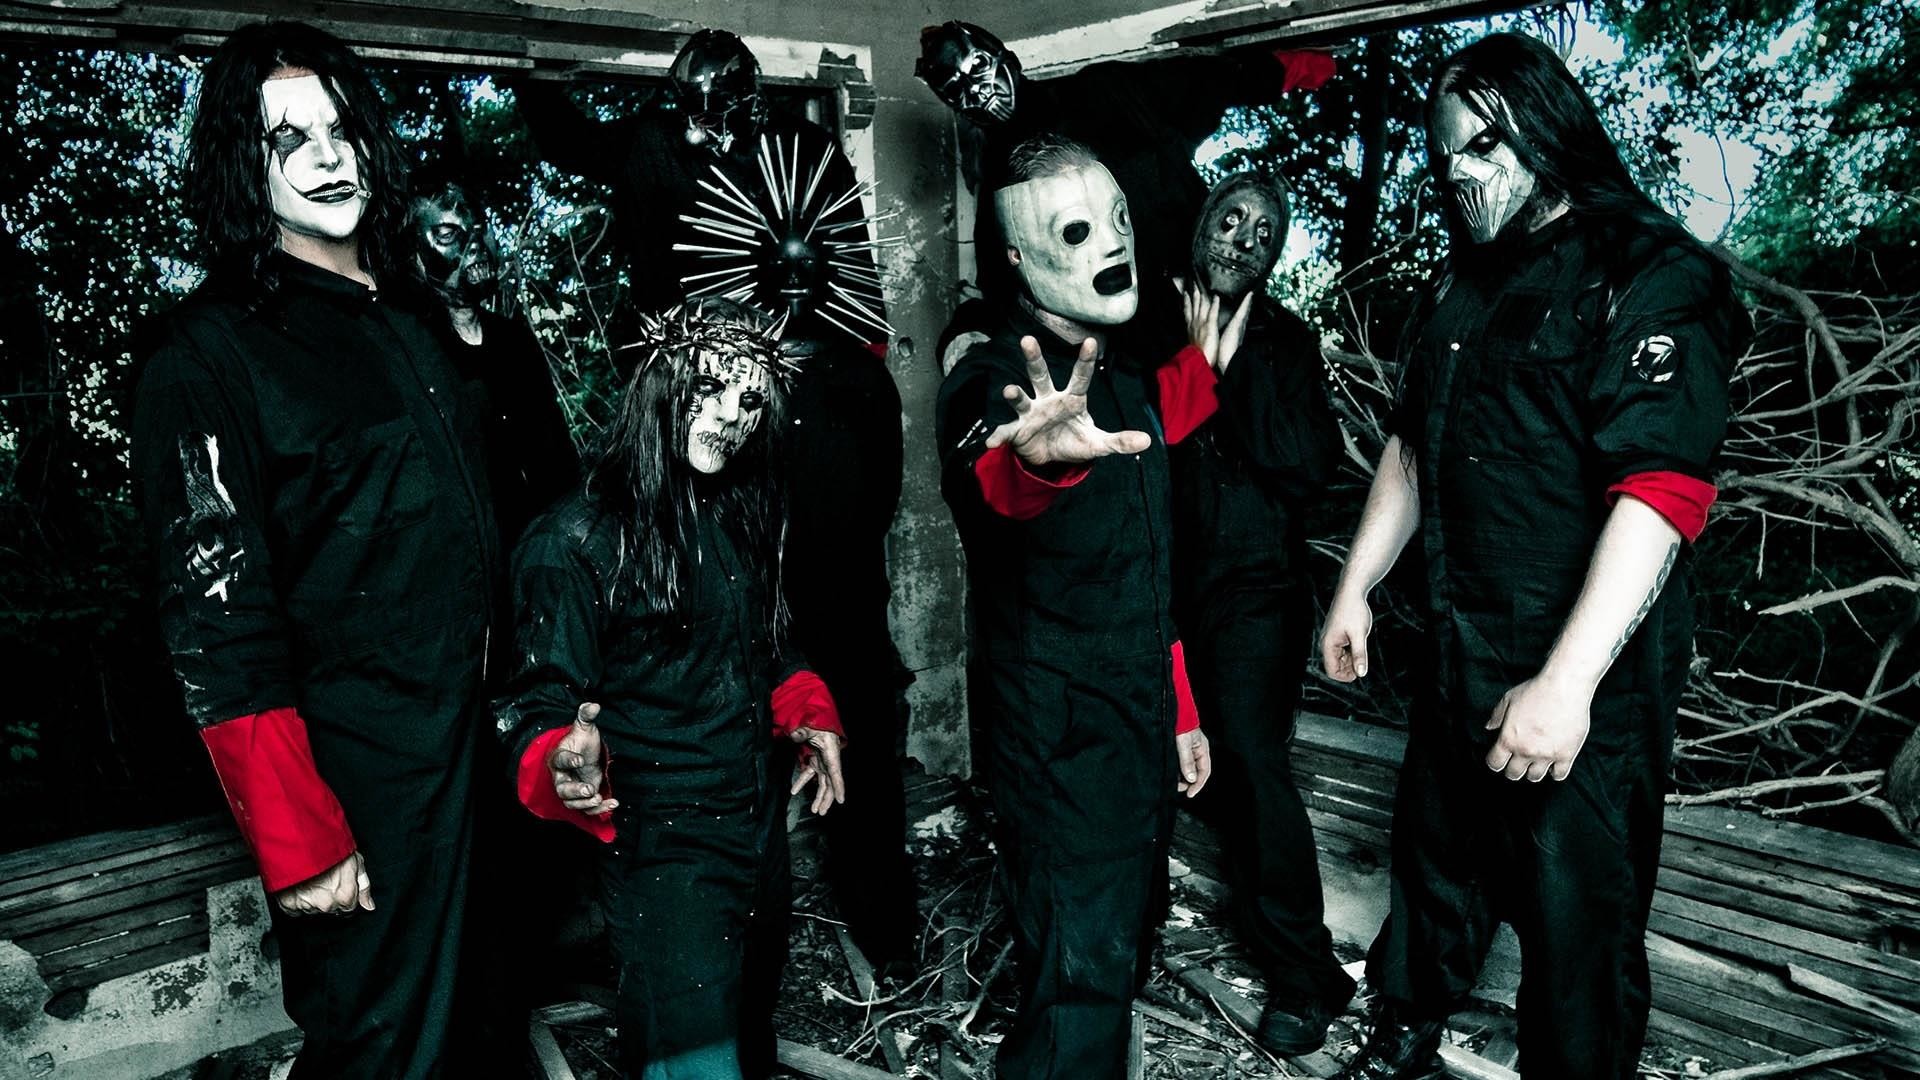 1920x1080 All 10 members of the band are having new masks for their latest album “the